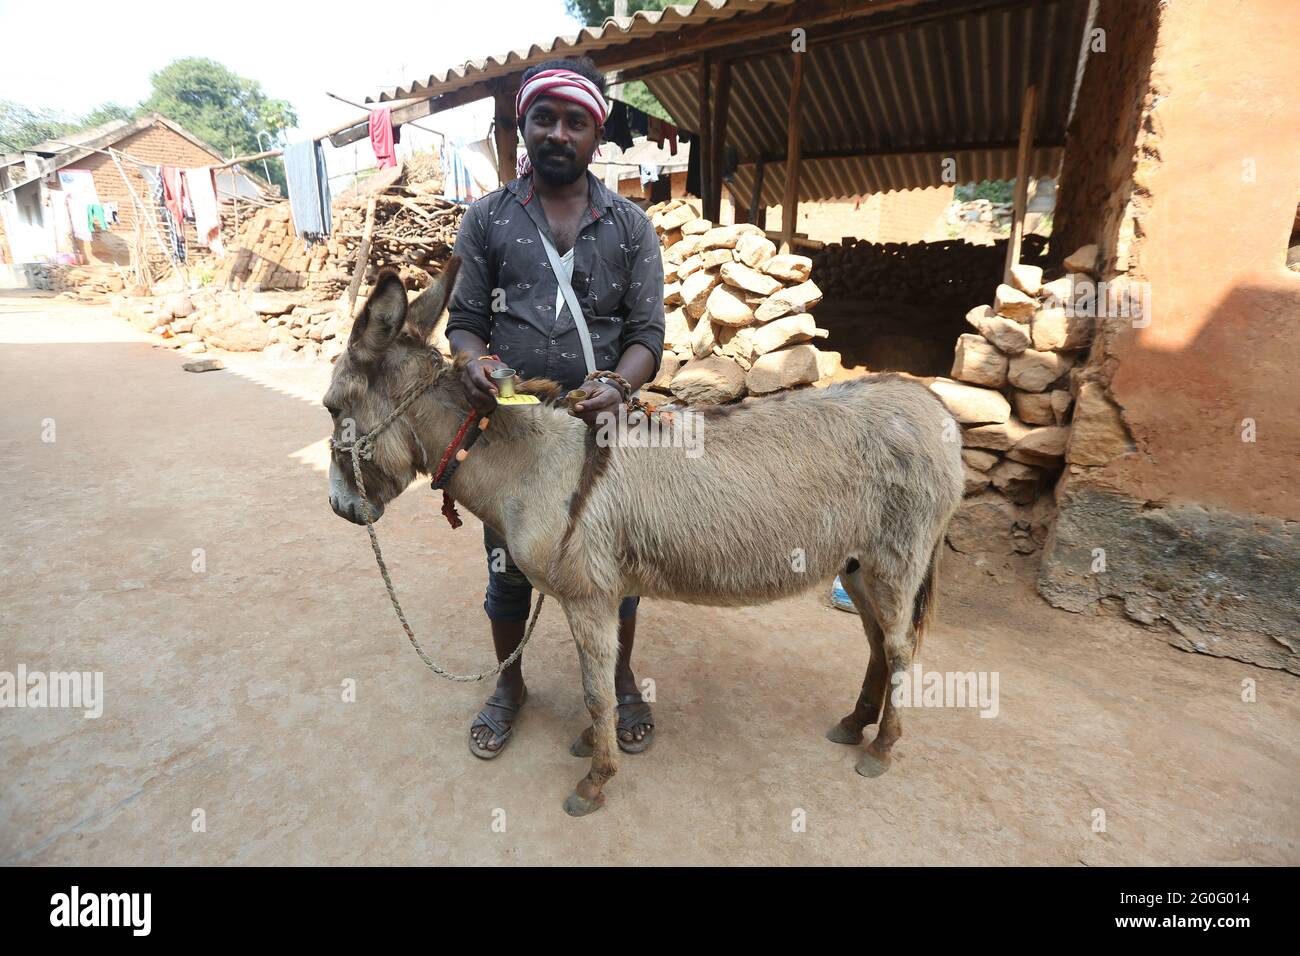 LANJIA SAORA TRIBE. Fresh Donkey milk sold in Puttasingh village Odisha, India. Donkey milk is not easily available but the milk is extremely nutritio Stock Photo